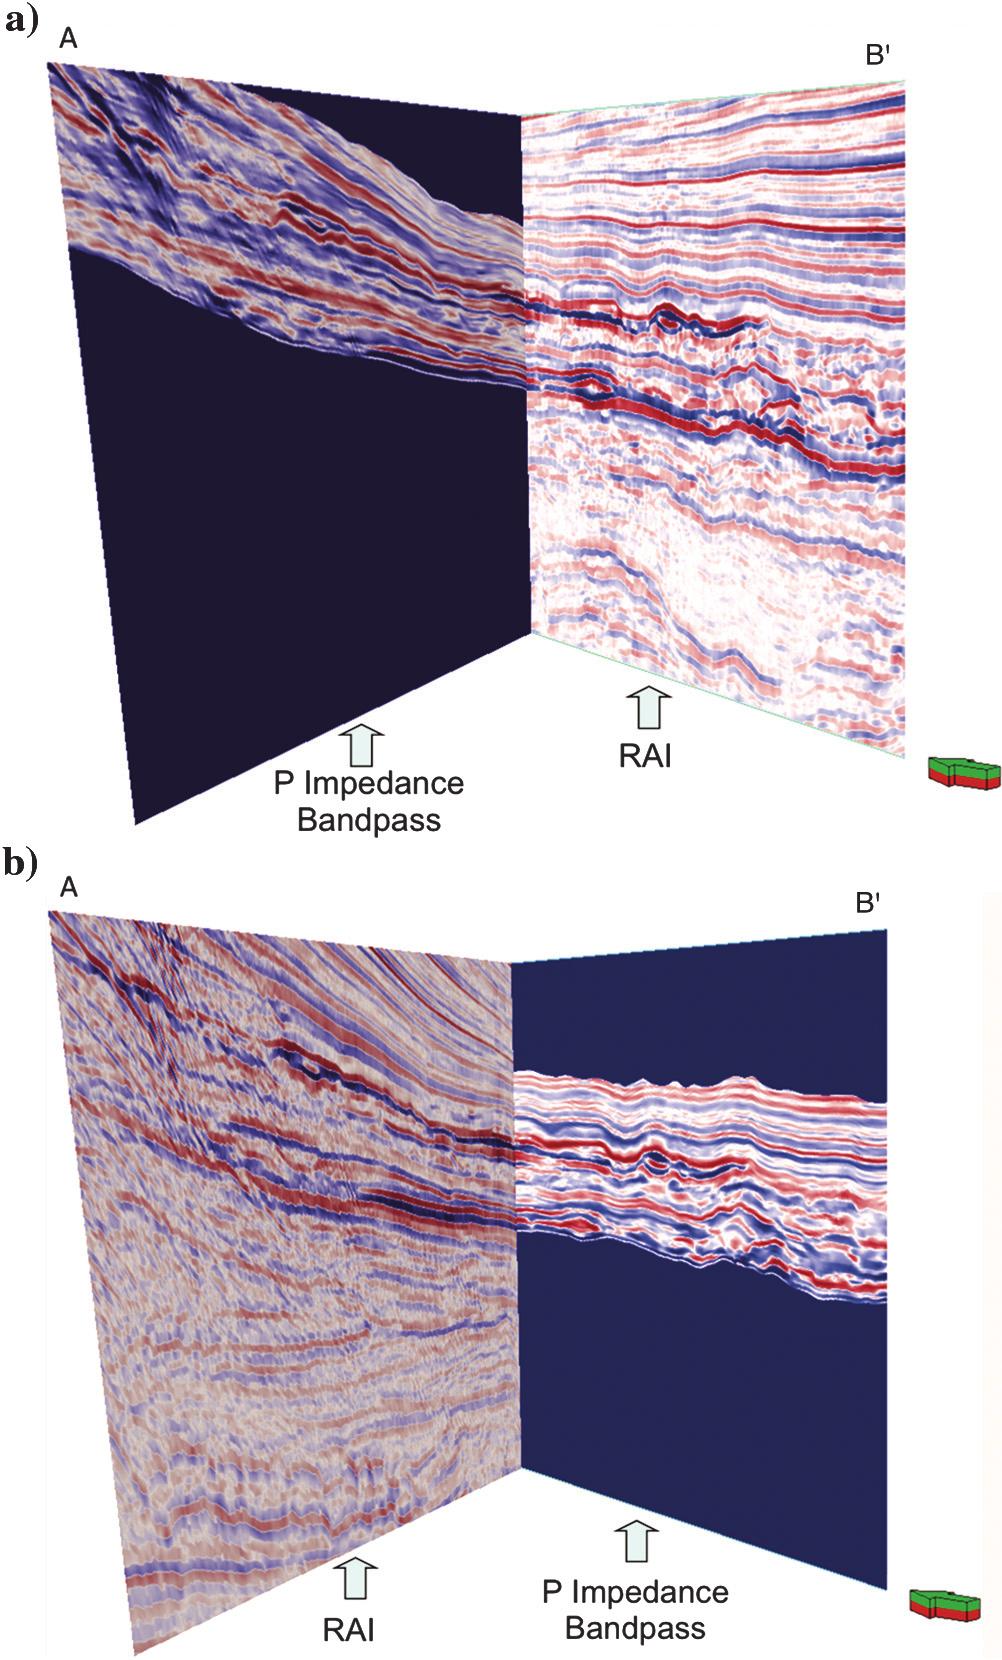 Figure 12. (a) The 3D visualization of the AA P-impedance band-pass and BB RAI vertical lines, respectively, and conversely (b) AA RAI and BB P-impedance band-pass RAI vertical lines, respectively.